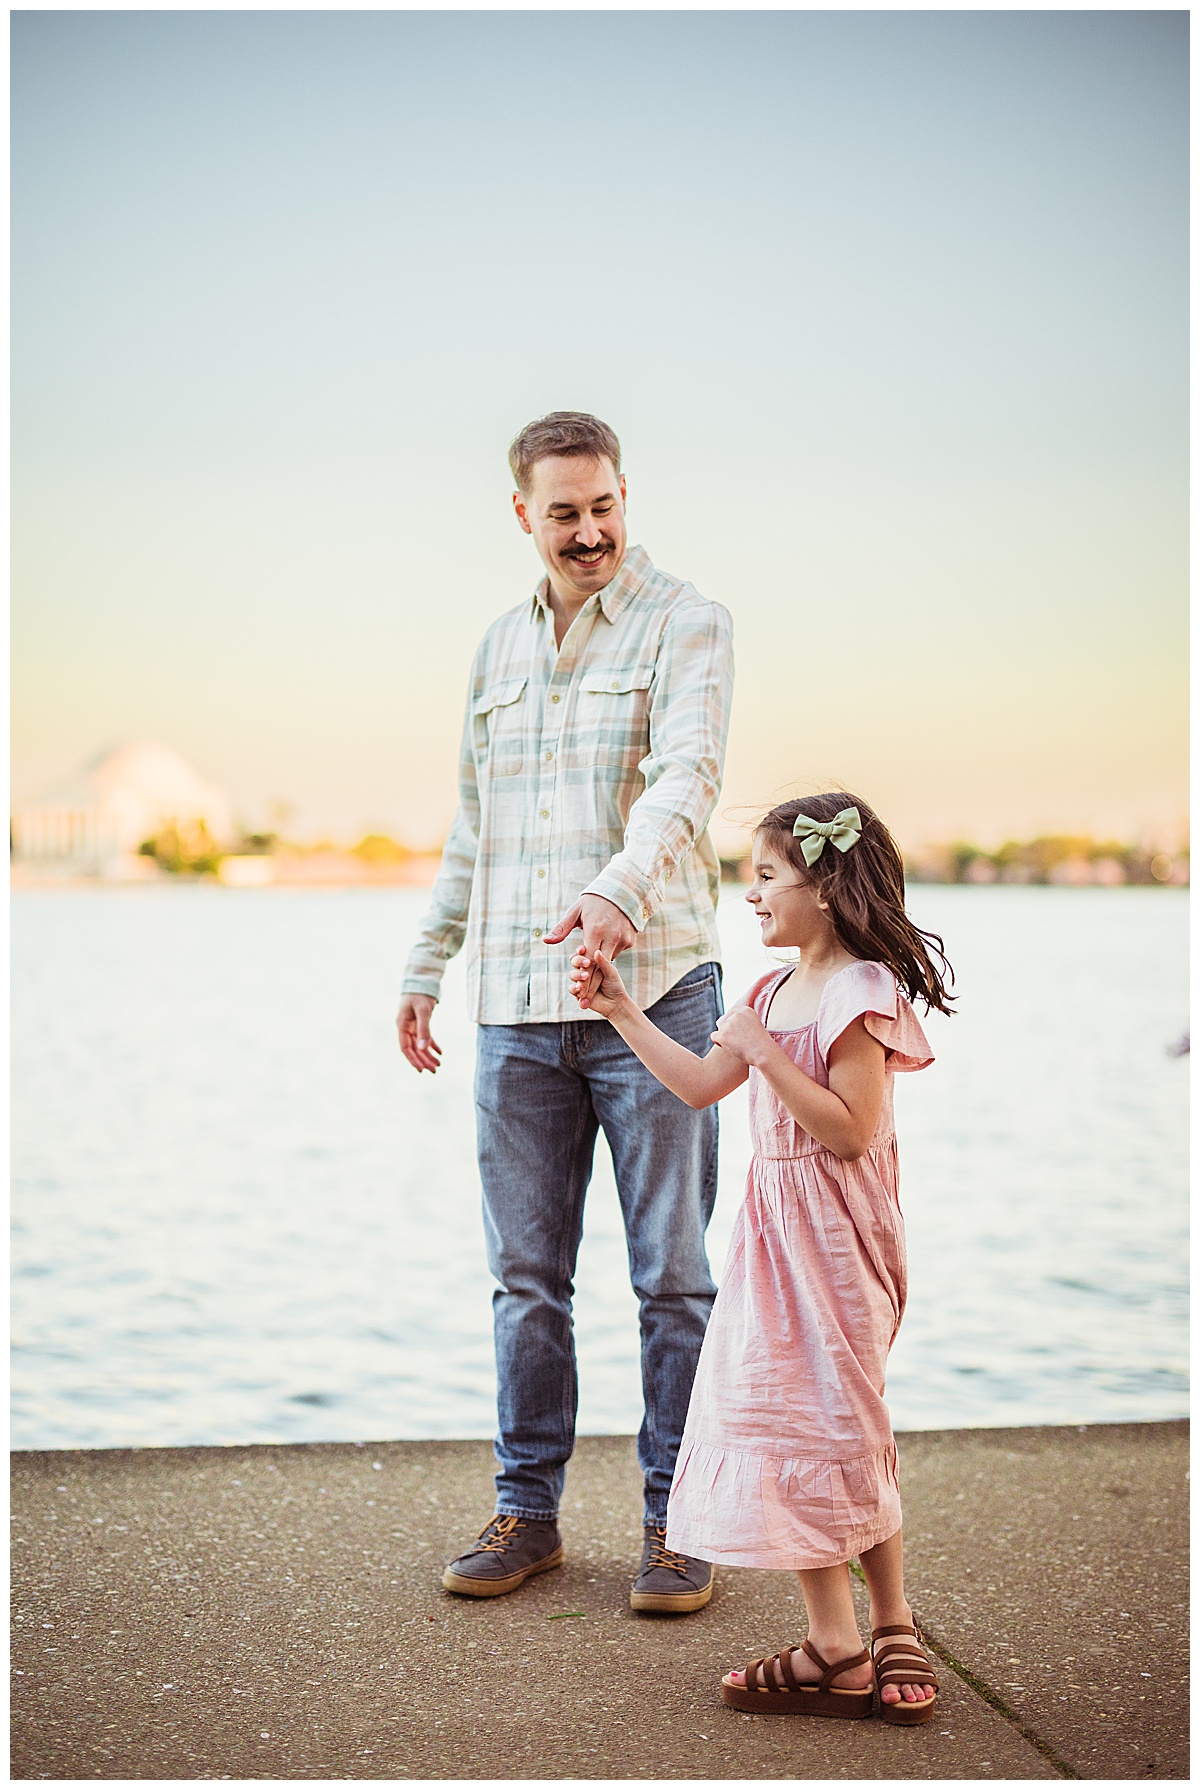 Dad plays with daughter for Norma Fayak Photography